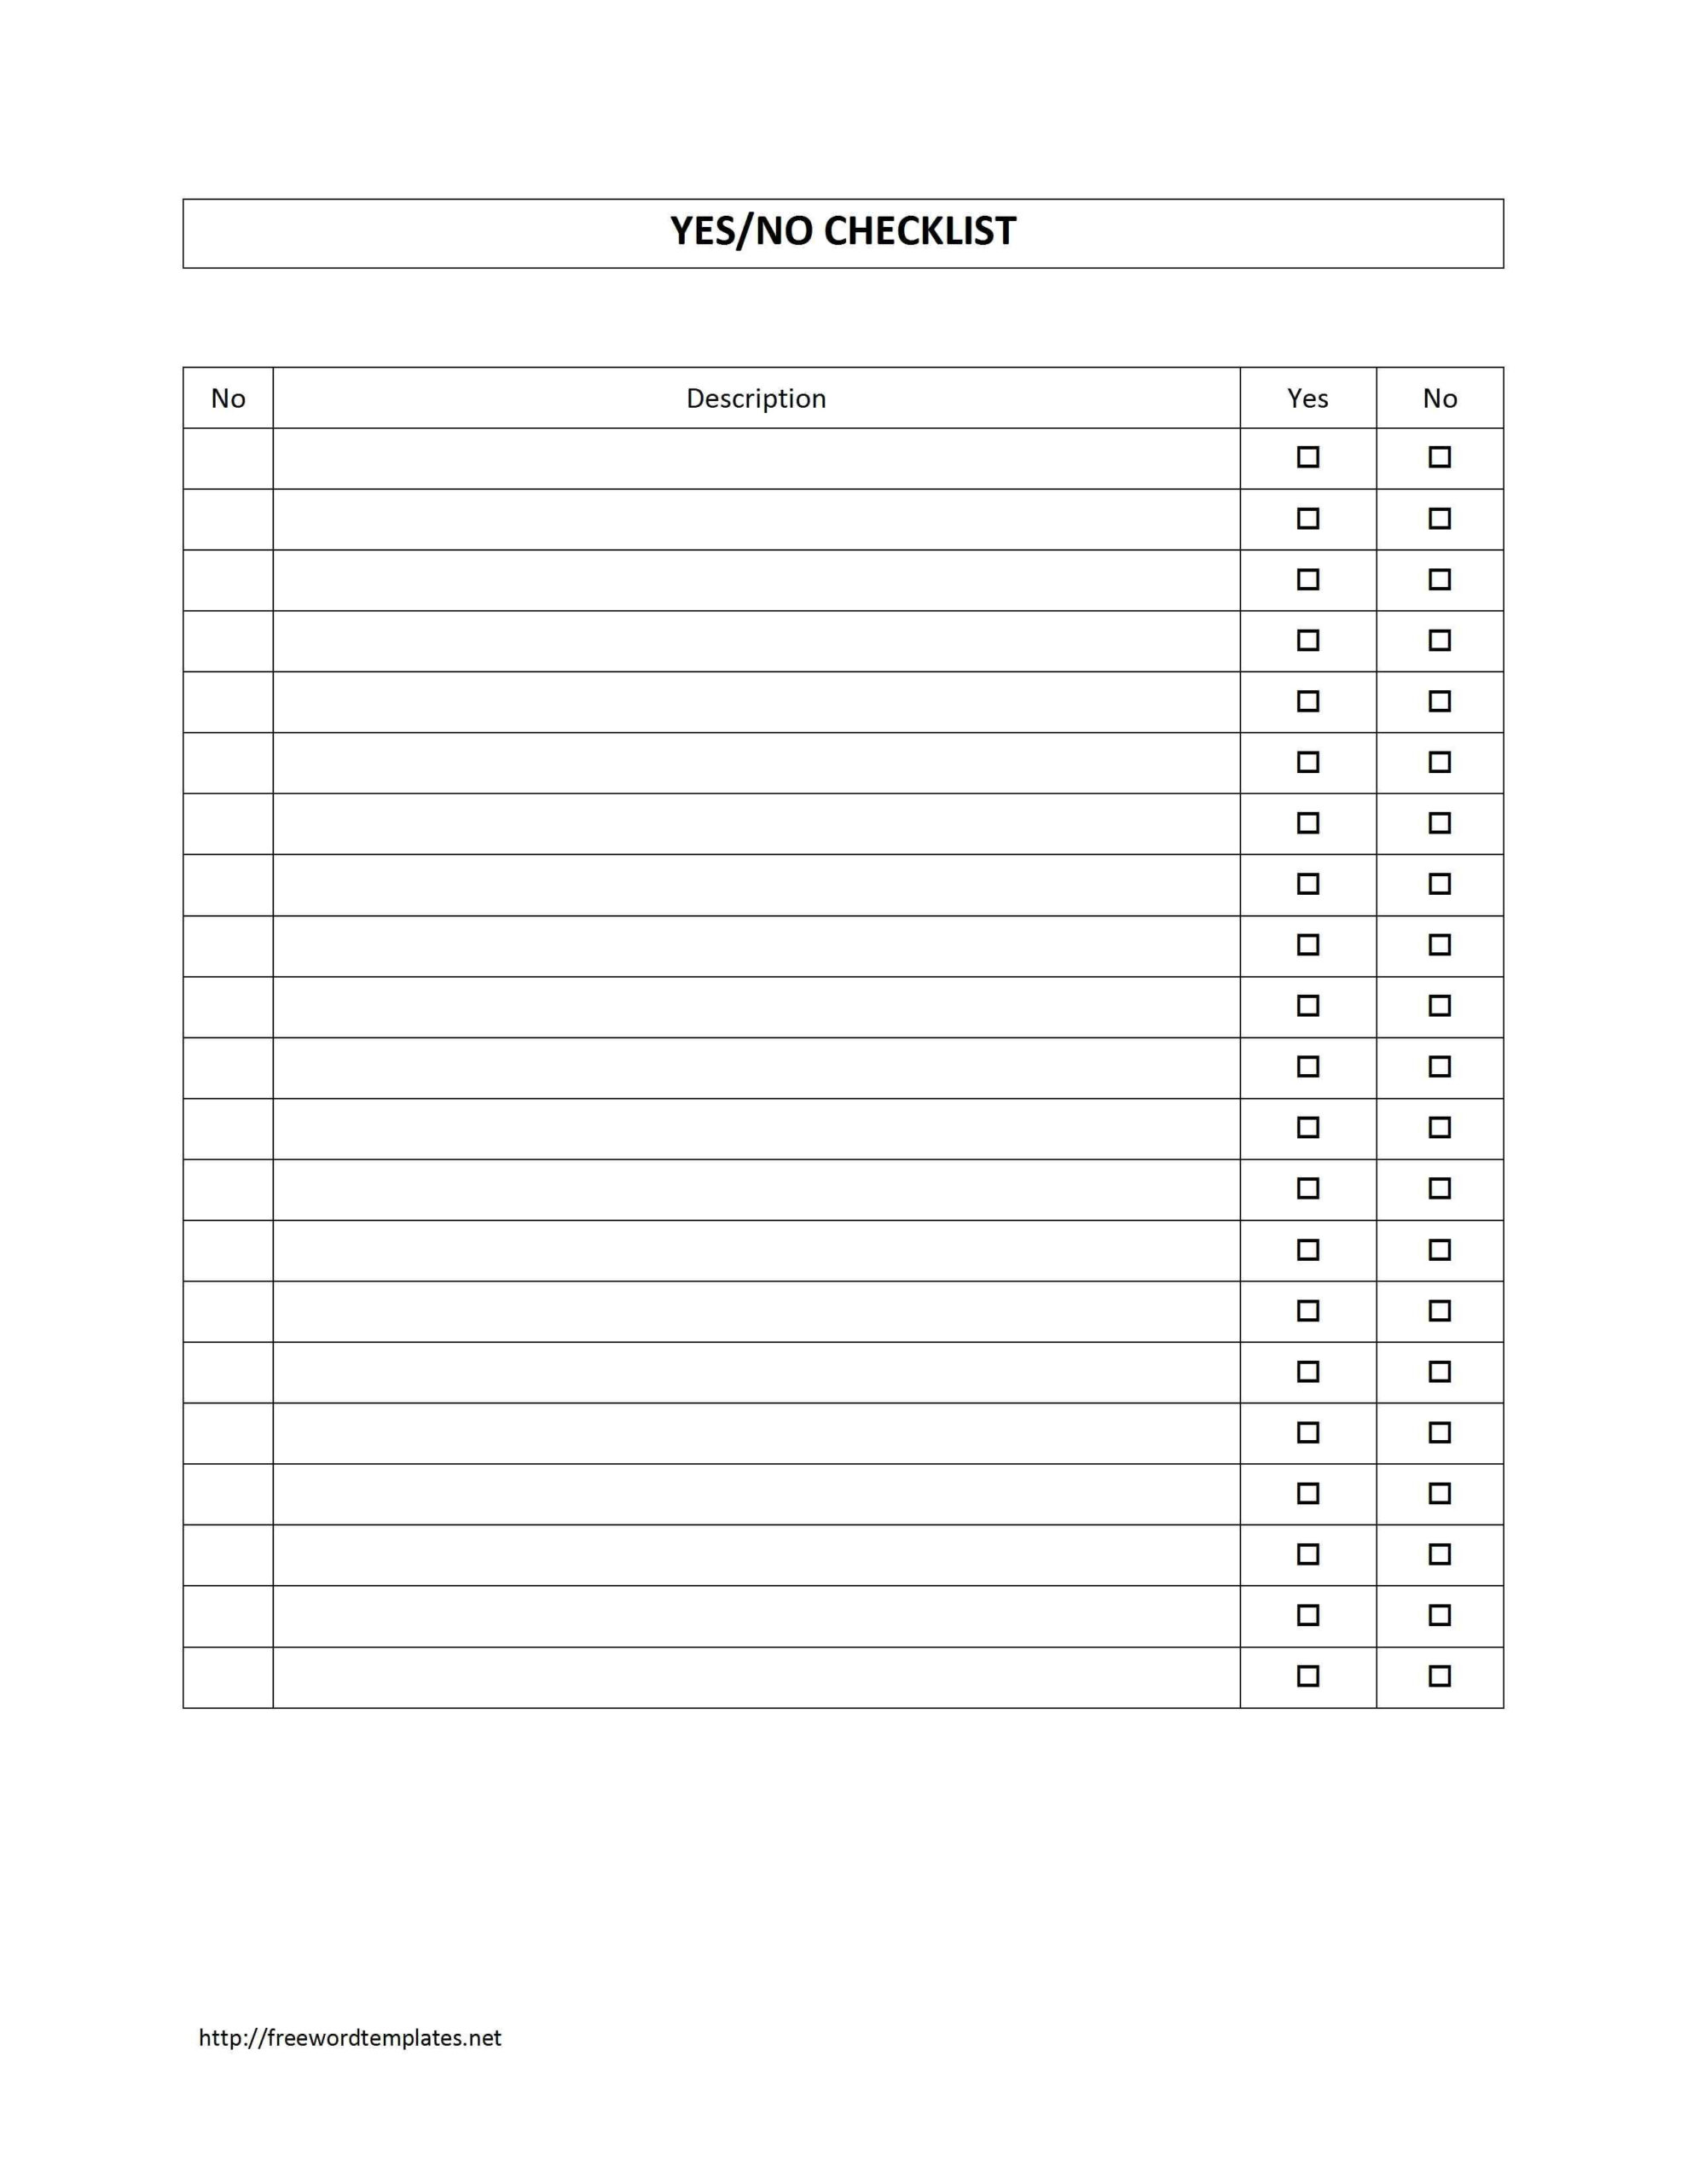 Survey Sheet With Yes/no Checklist Template | Free Microsoft Pertaining To Questionnaire Design Template Word